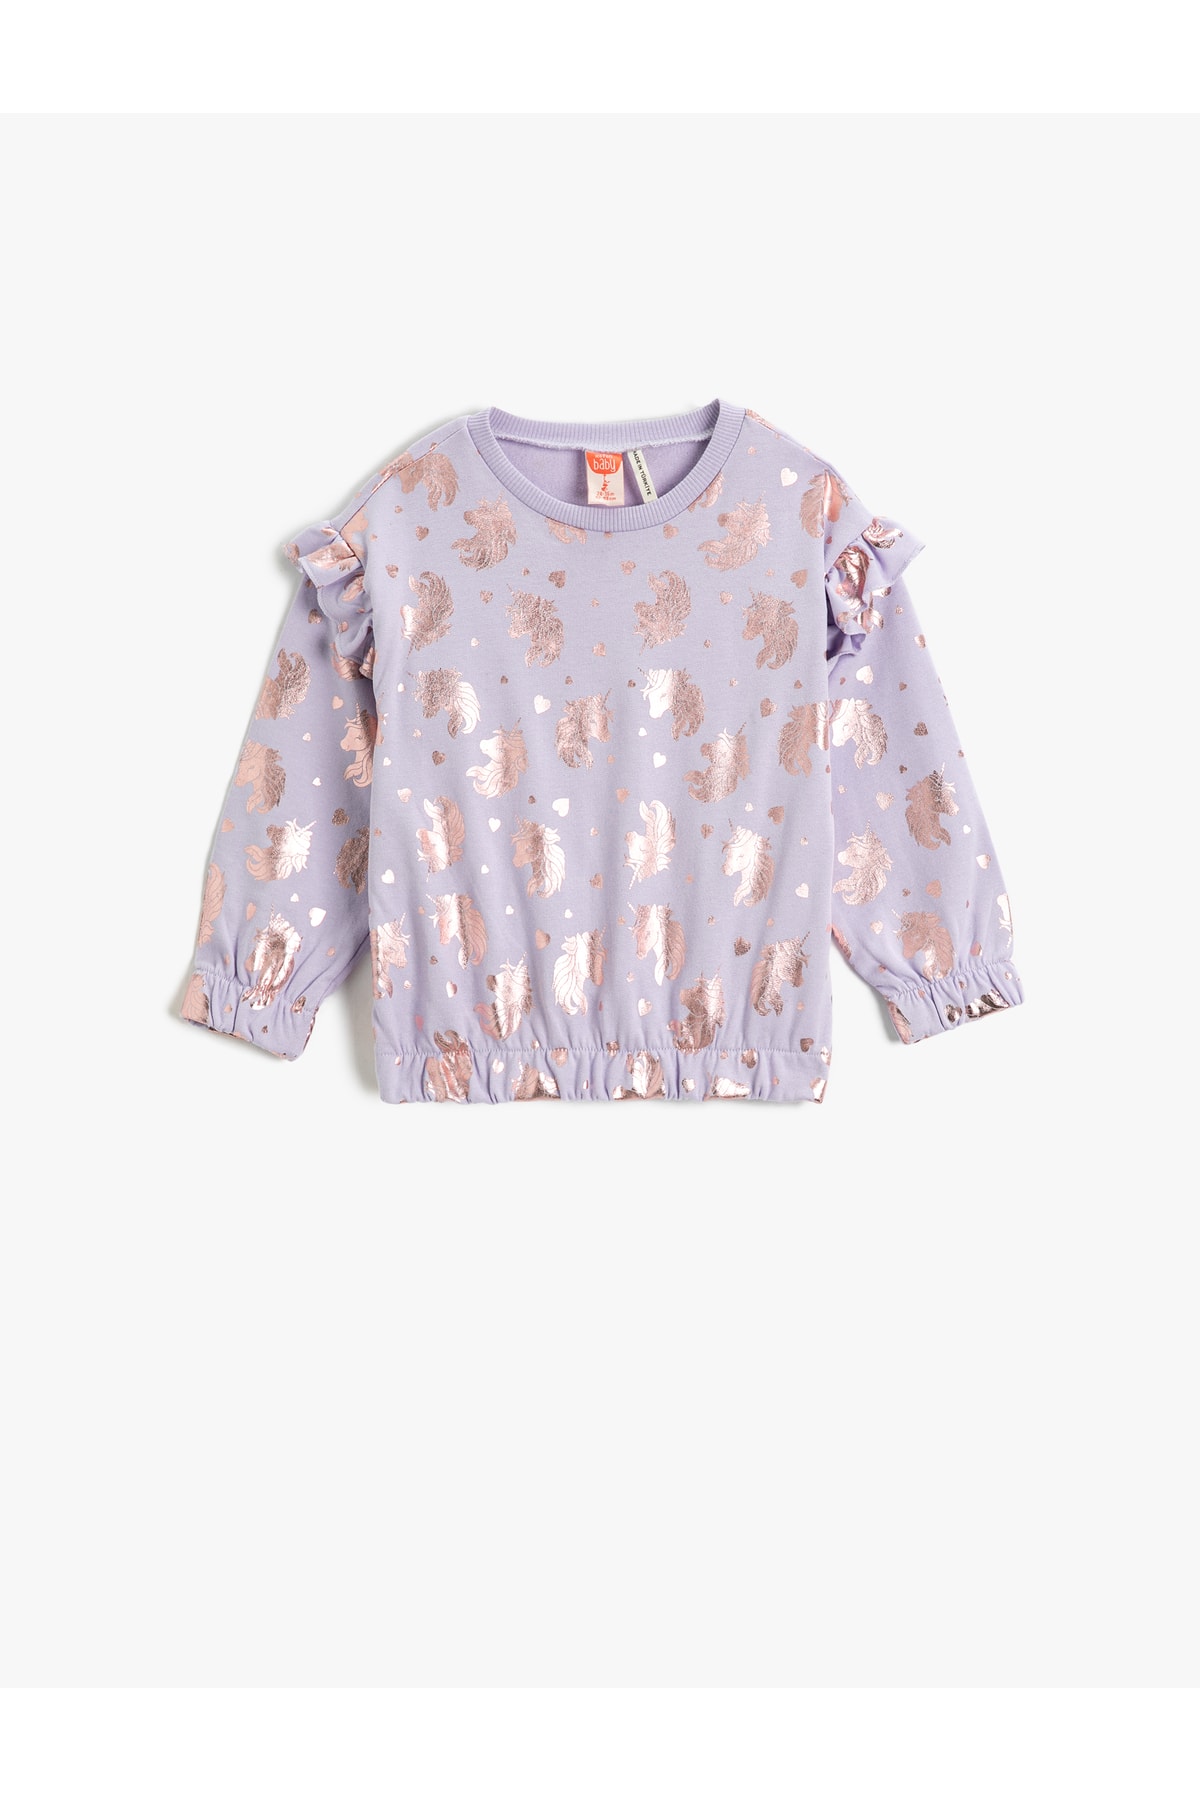 Levně Koton Shiny Unicorn Printed Sweatshirt with Ruffle Detailed Long Sleeves with Elastic Waist and Cuffs